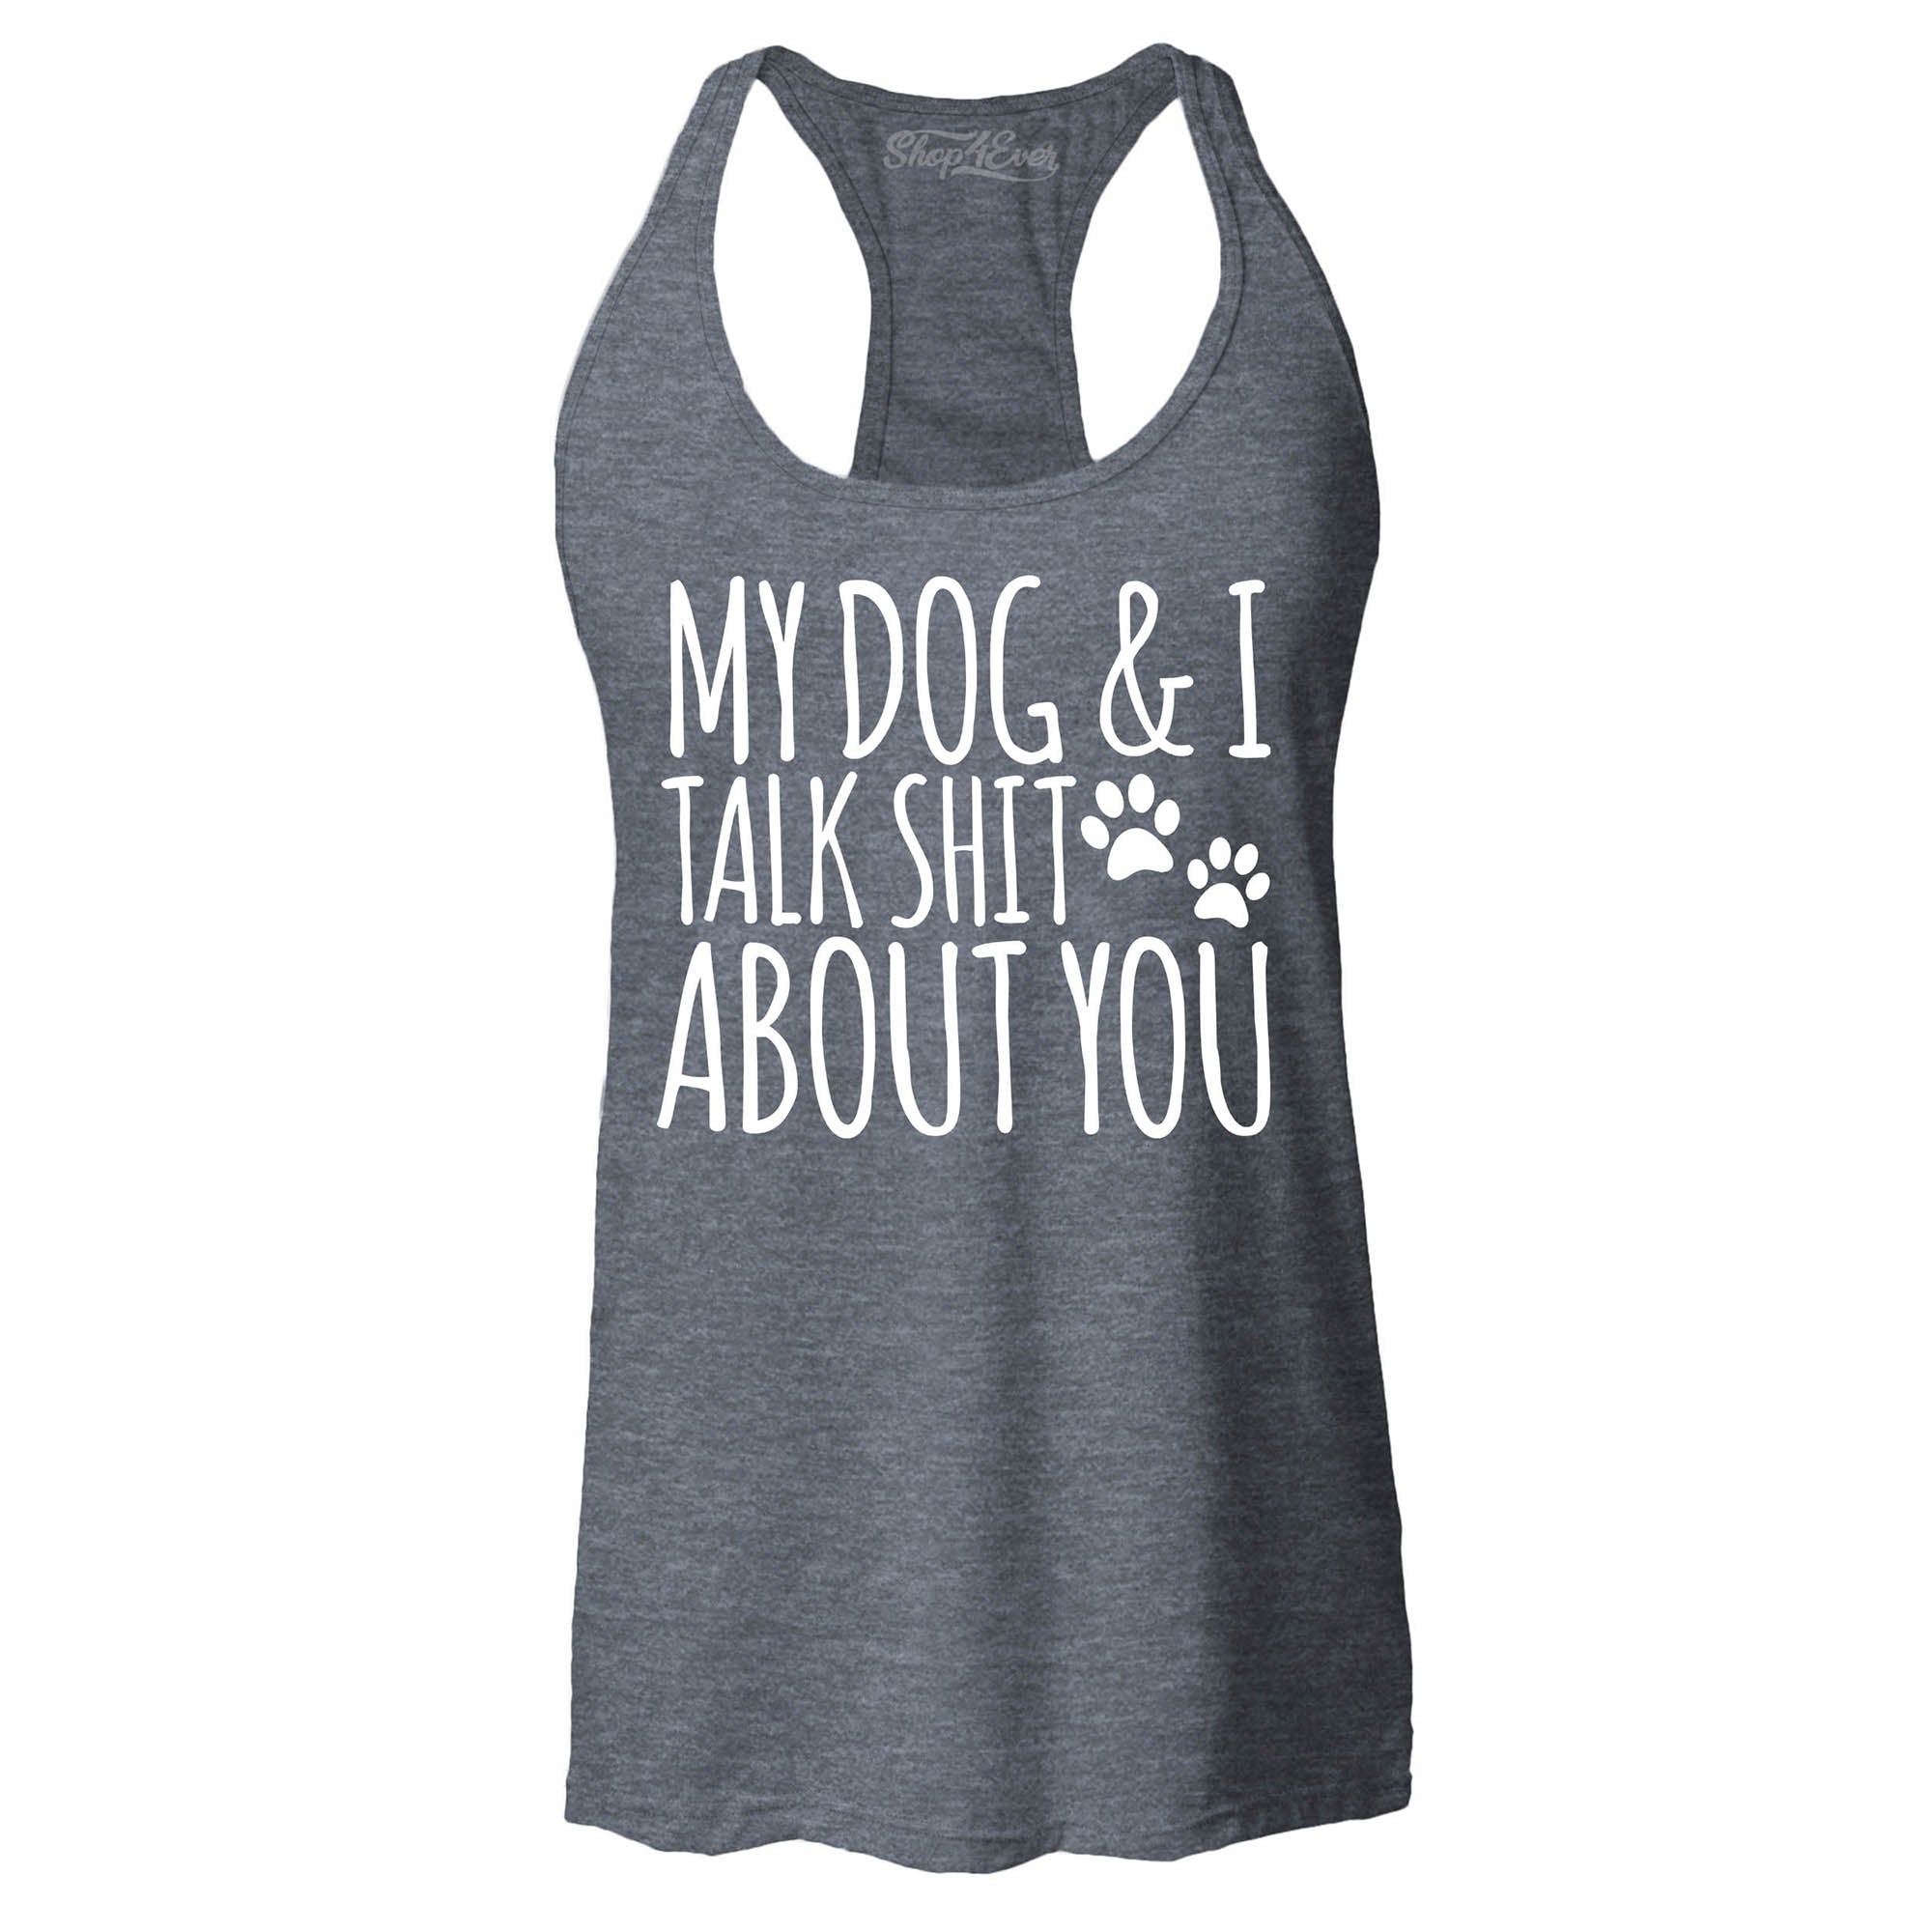 My Dog and I Talk Shit About You Women's Racerback Tank Top Slim Fit